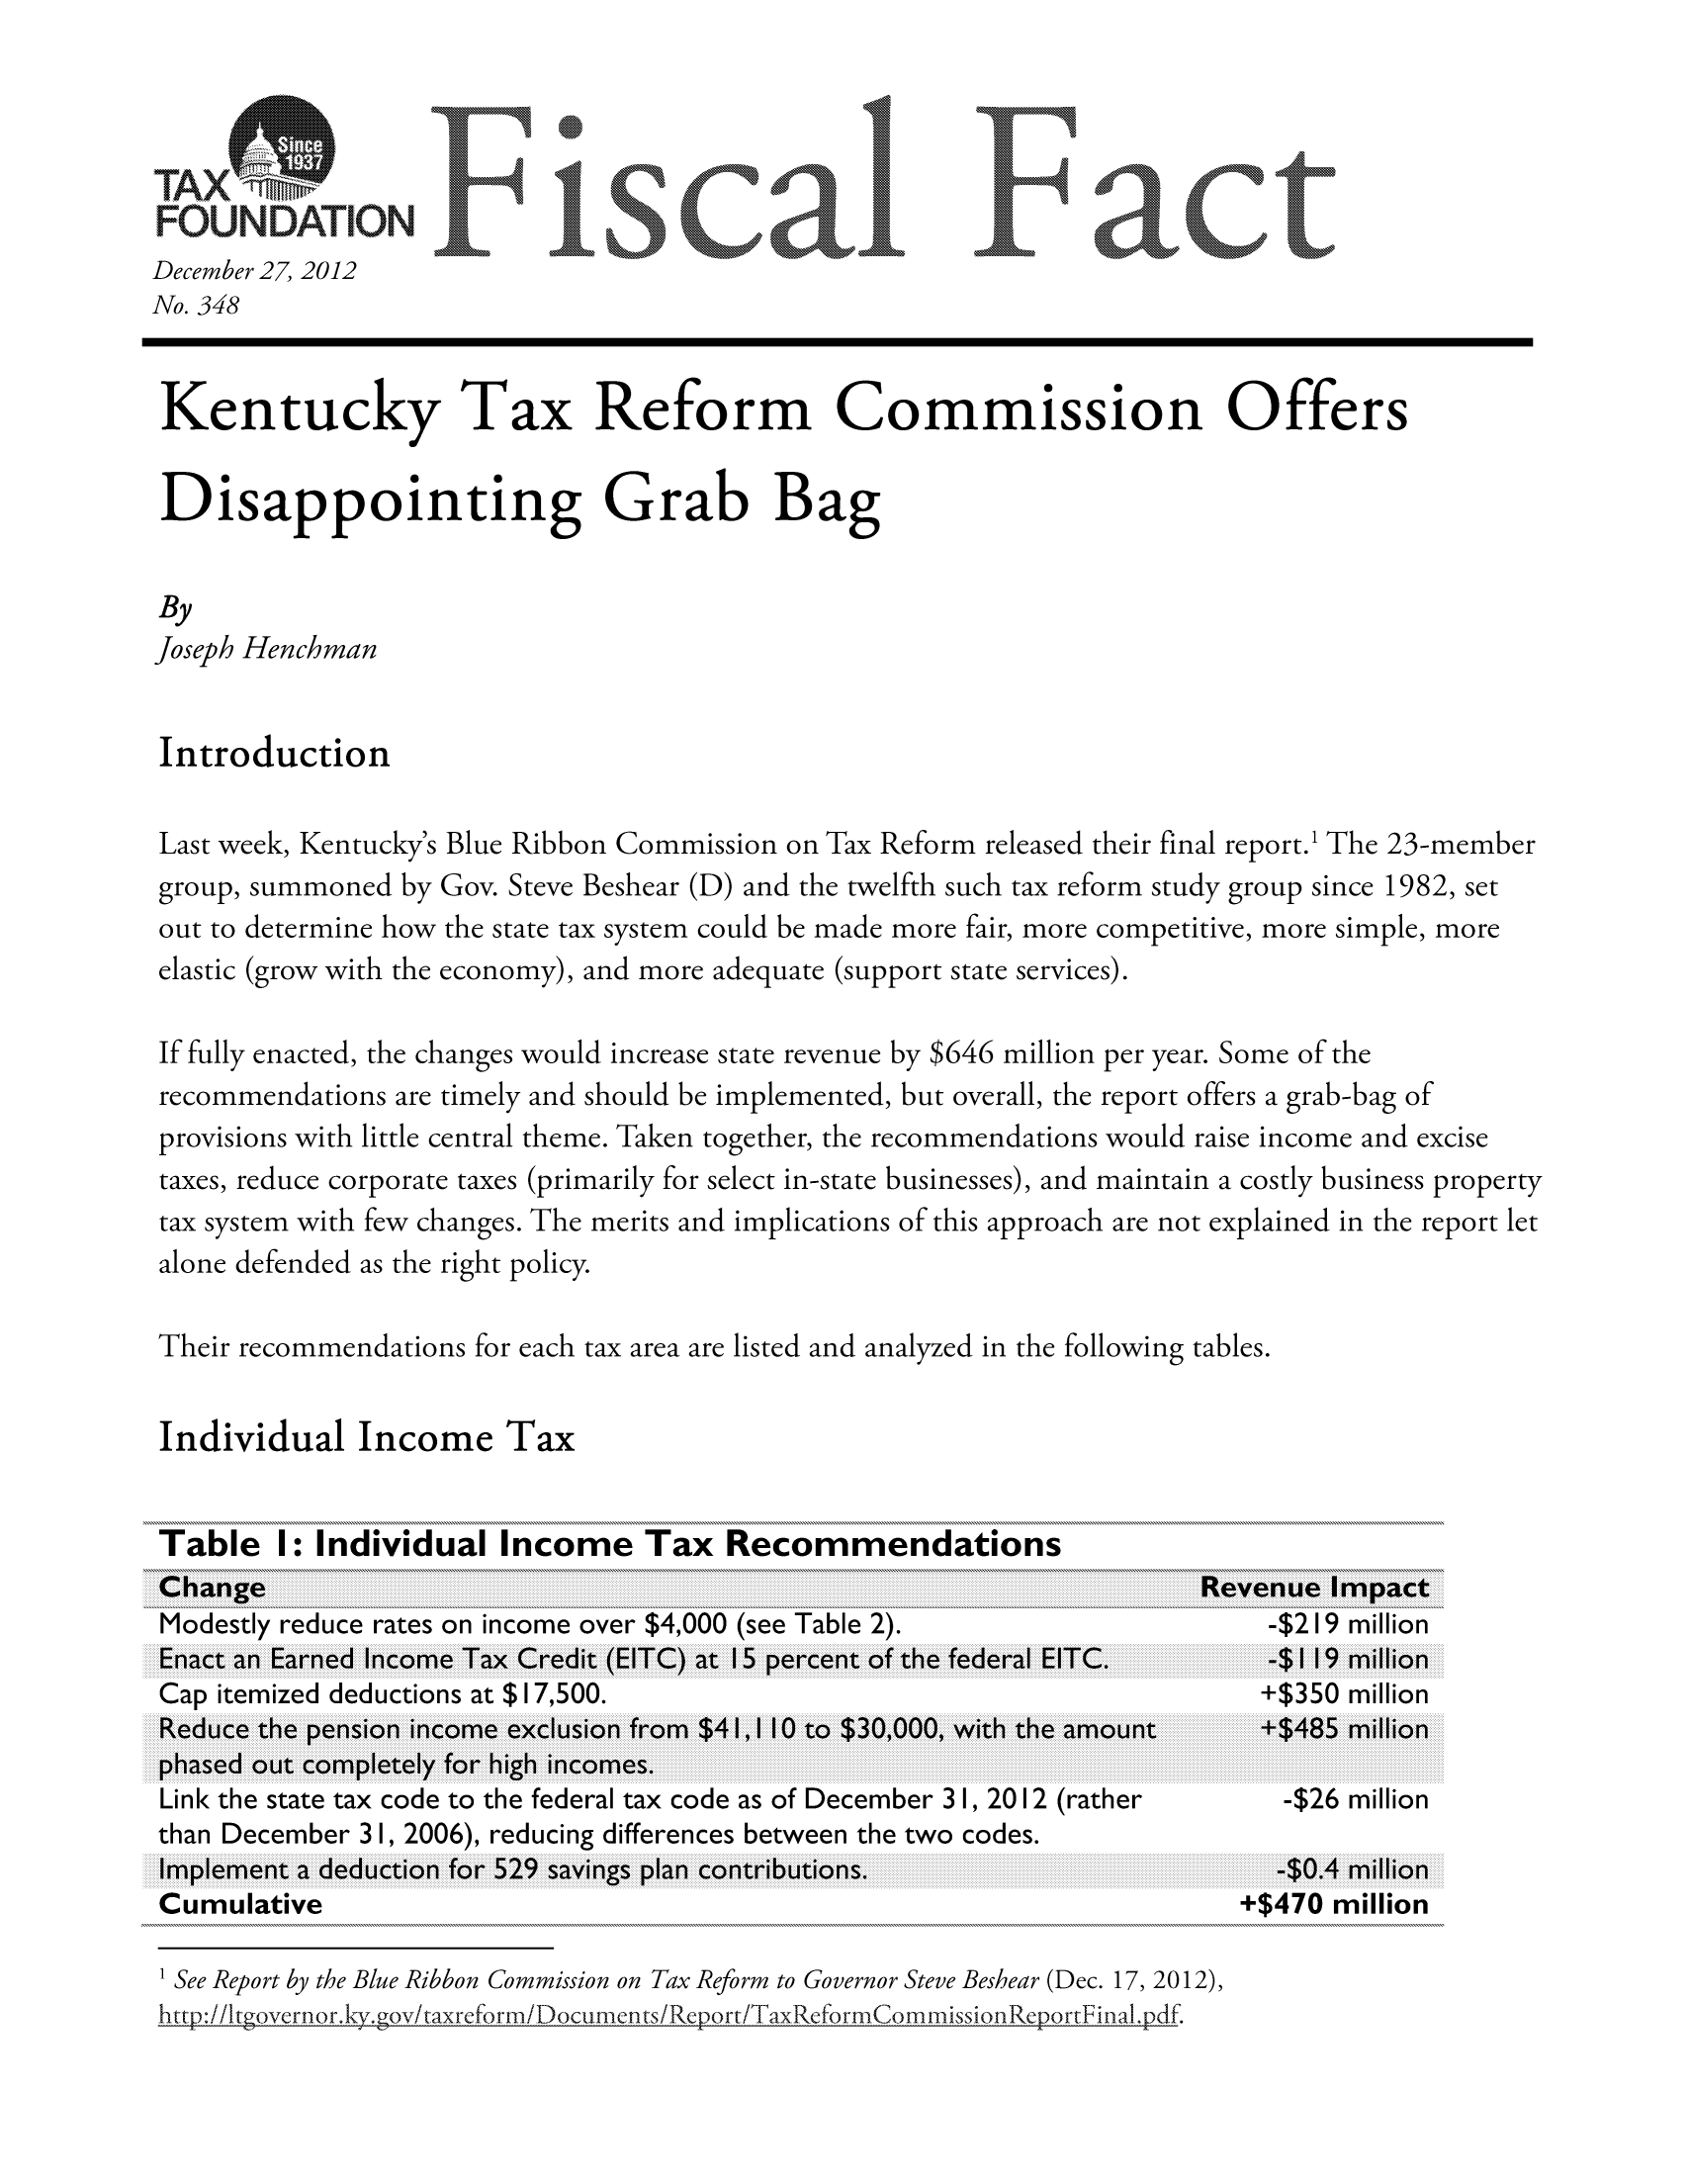 handle is hein.taxfoundation/ffdeixz0001 and id is 1 raw text is: TAX
December 27, 2012
No. 348
Kentucky Tax Reform Commission Offers
Disappointing Grab Bag
By
Joseph Henchman
Introduction
Last week, Kentucky's Blue Ribbon Commission on Tax Reform released their final report.1 The 23-member
group, summoned by Gov. Steve Beshear (D) and the twelfth such tax reform study group since 1982, set
out to determine how the state tax system could be made more fair, more competitive, more simple, more
elastic (grow with the economy), and more adequate (support state services).
If fully enacted, the changes would increase state revenue by $646 million per year. Some of the
recommendations are timely and should be implemented, but overall, the report offers a grab-bag of
provisions with little central theme. Taken together, the recommendations would raise income and excise
taxes, reduce corporate taxes (primarily for select in-state businesses), and maintain a costly business property
tax system with few changes. The merits and implications of this approach are not explained in the report let
alone defended as the right policy.
Their recommendations for each tax area are listed and analyzed in the following tables.
Individual Income Tax
Table I: Individual Income Tax Recommendations
Modestly reduce rates on income over $4,000 (see Table 2).                 -$219 million
Cap itemized deductions at $17,500.                                        +$350 million
Linlk the state tax code to the federal tax code as of December 31I, 2012 (rather  -$26 million
than December 31I, 2006), reducing differences between the two codes.
Cumulative                                                                +$470 million

1 See Report by the Blue Ribbon Commission on Tax Reform to Governor Steve Beshear (Dec. 17, 2012),
httap//:Itgovrnorkygov/taxreform/Documents/Re1ort/TIaxIoeformCommissi onRelortFina .df.


